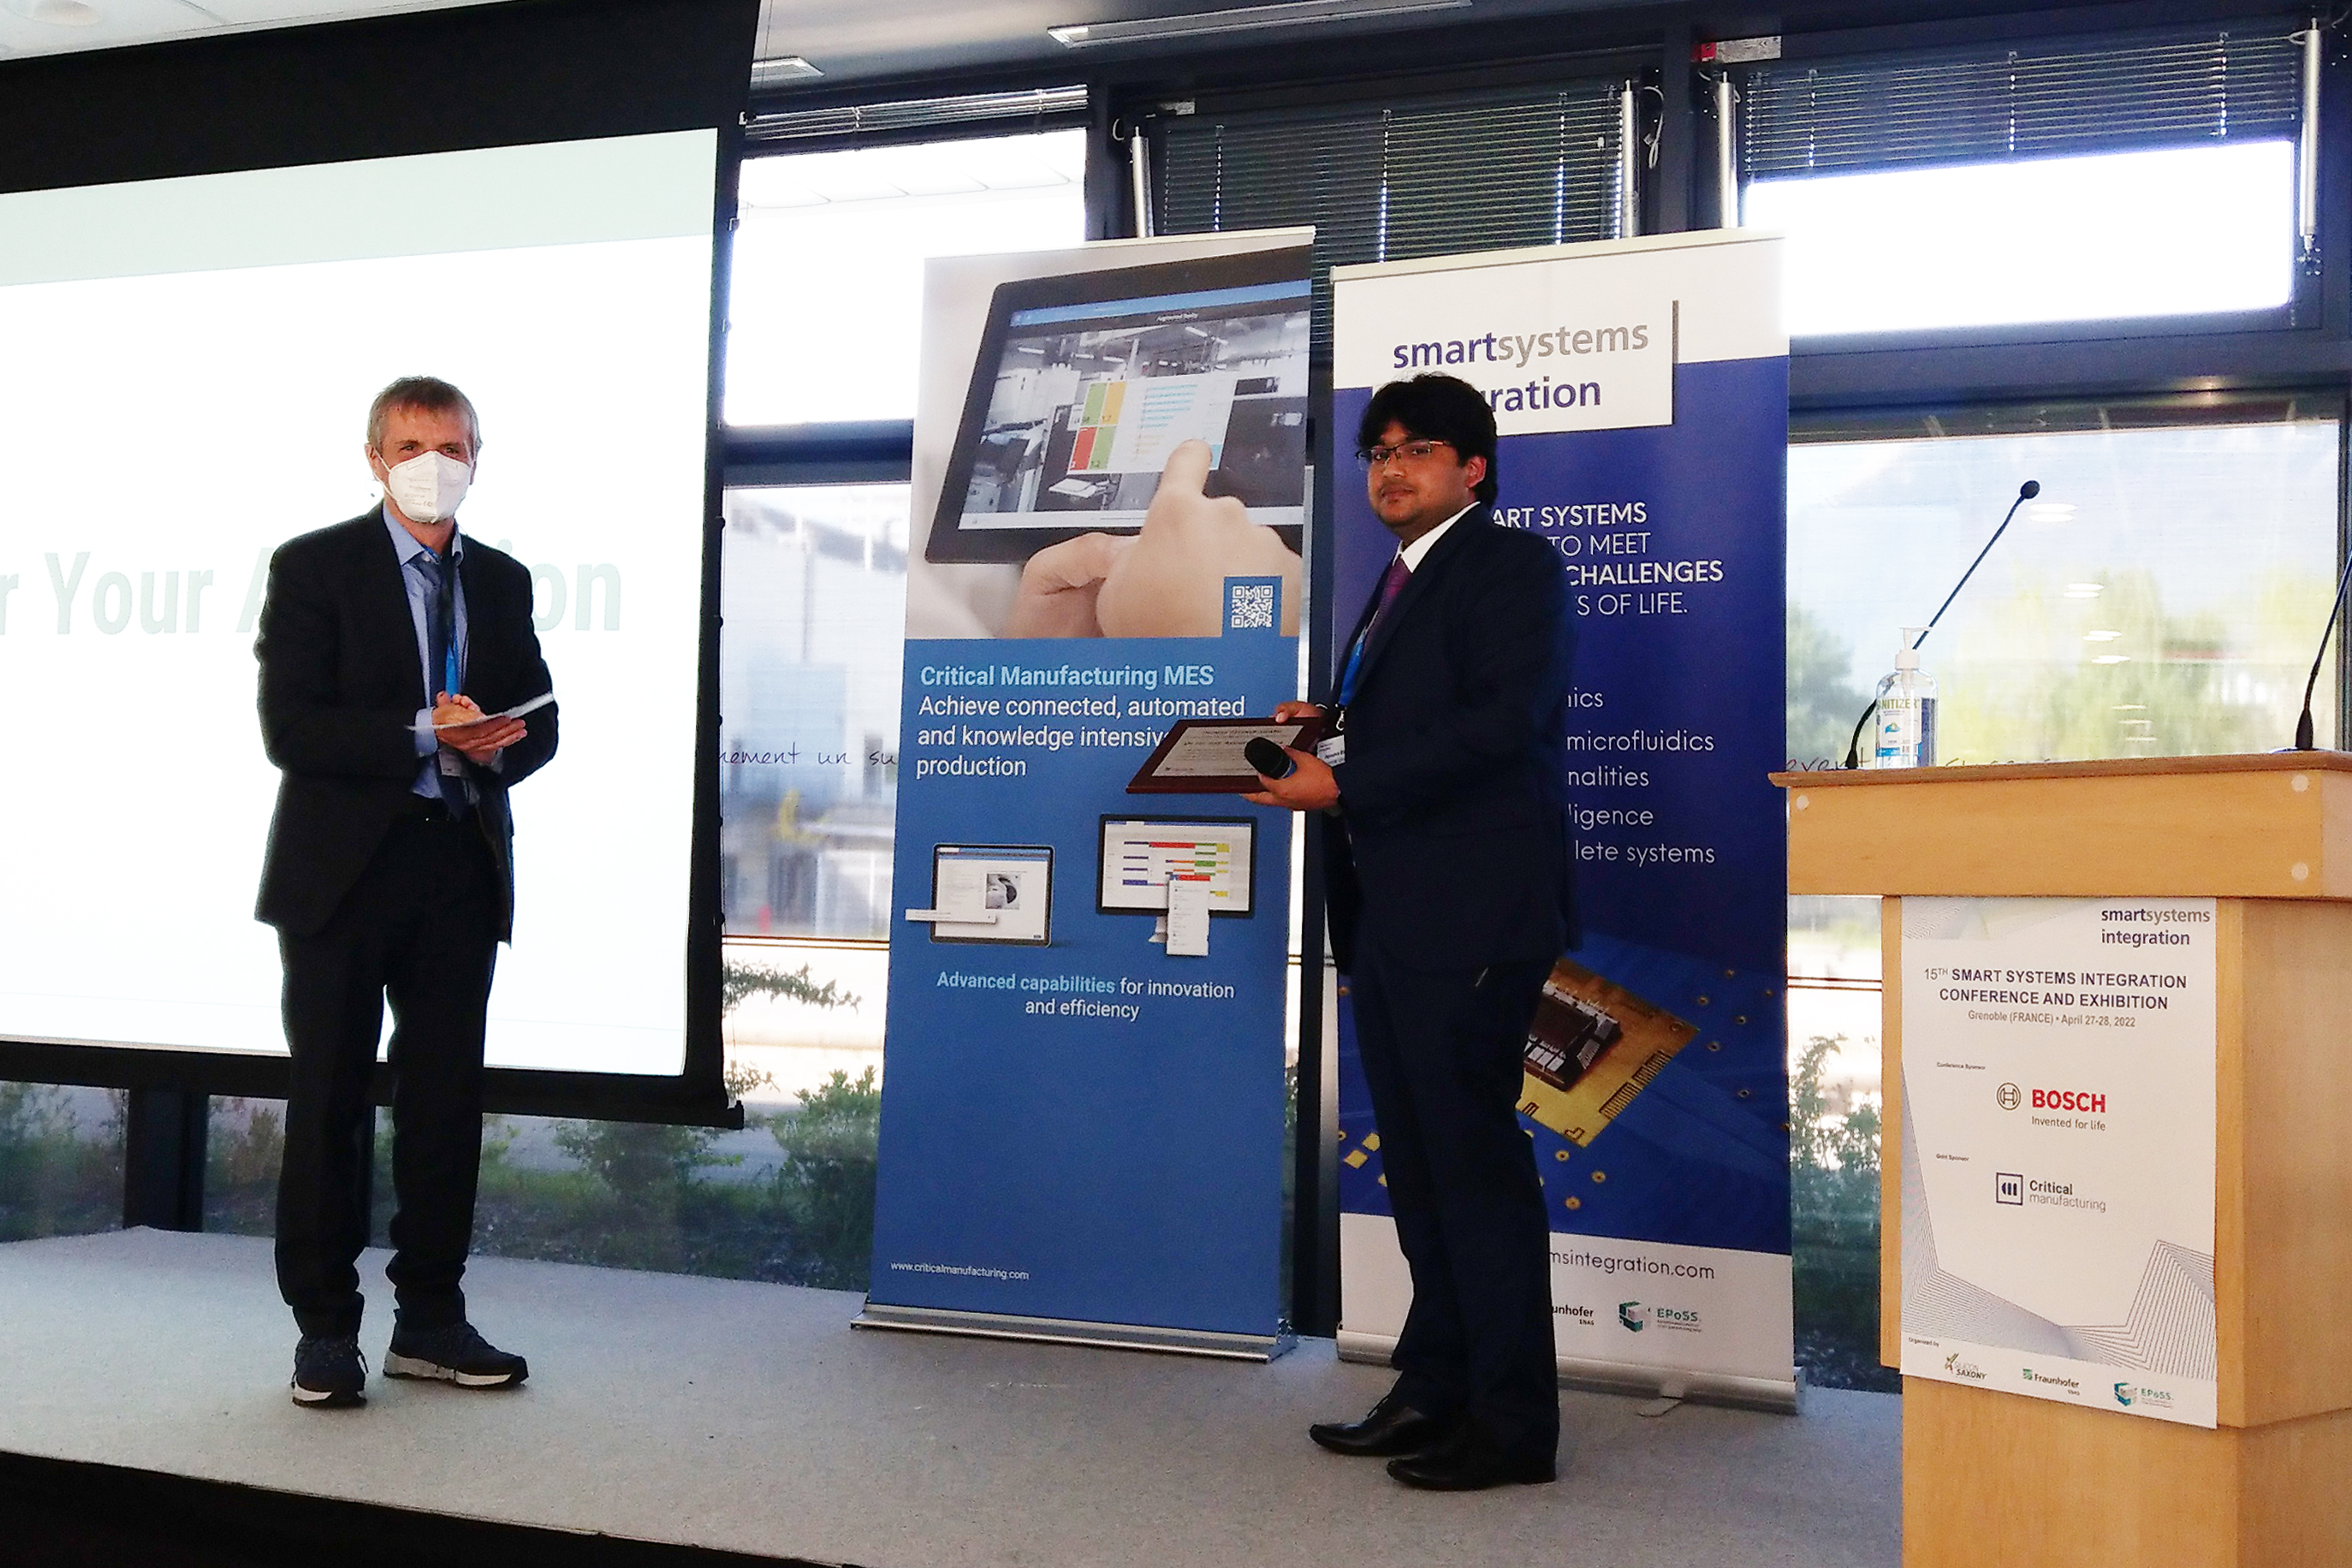 Dr. Apoorva Sharma, received the Thomas Gessner Award in Grenoble for his dissertation "Correlation Between the Structural, Optical, and Magnetic Properties of CoFeB and CoFeB Based Magnetic Tunnel Junctions Upon Laser or Oven Annealing".